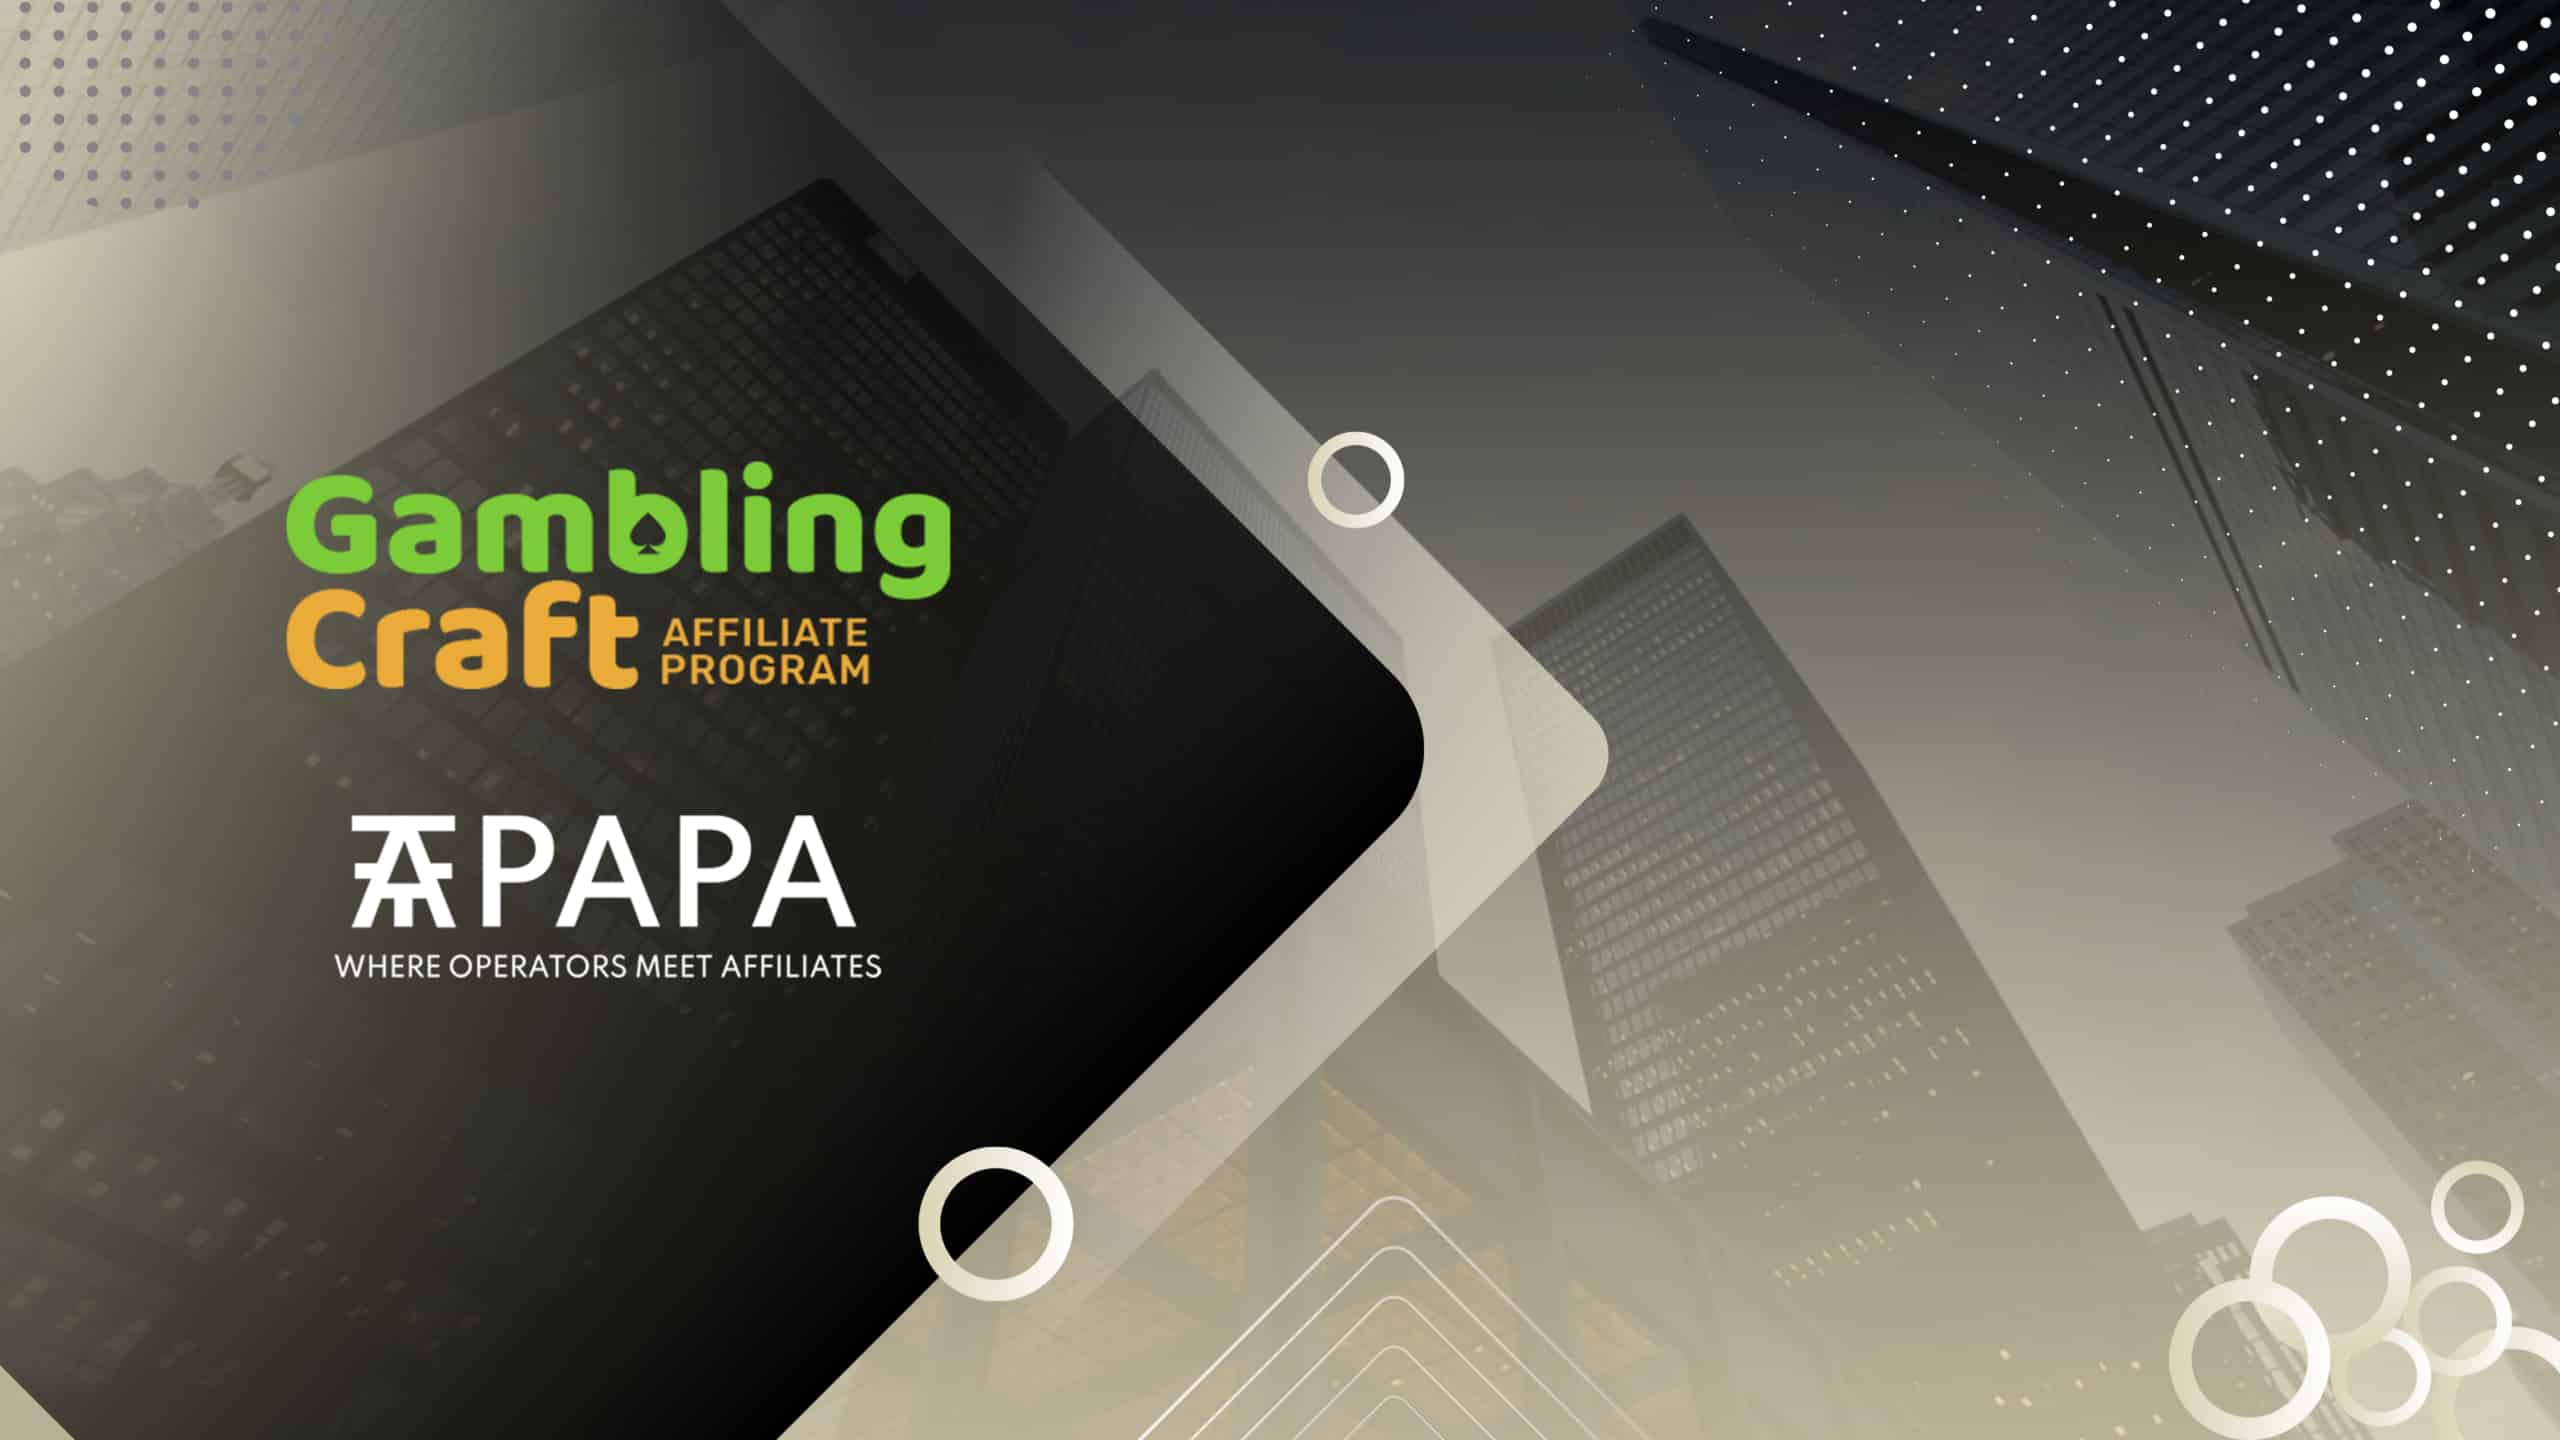 Gambling Craft extends strategic partnership with AffPapa